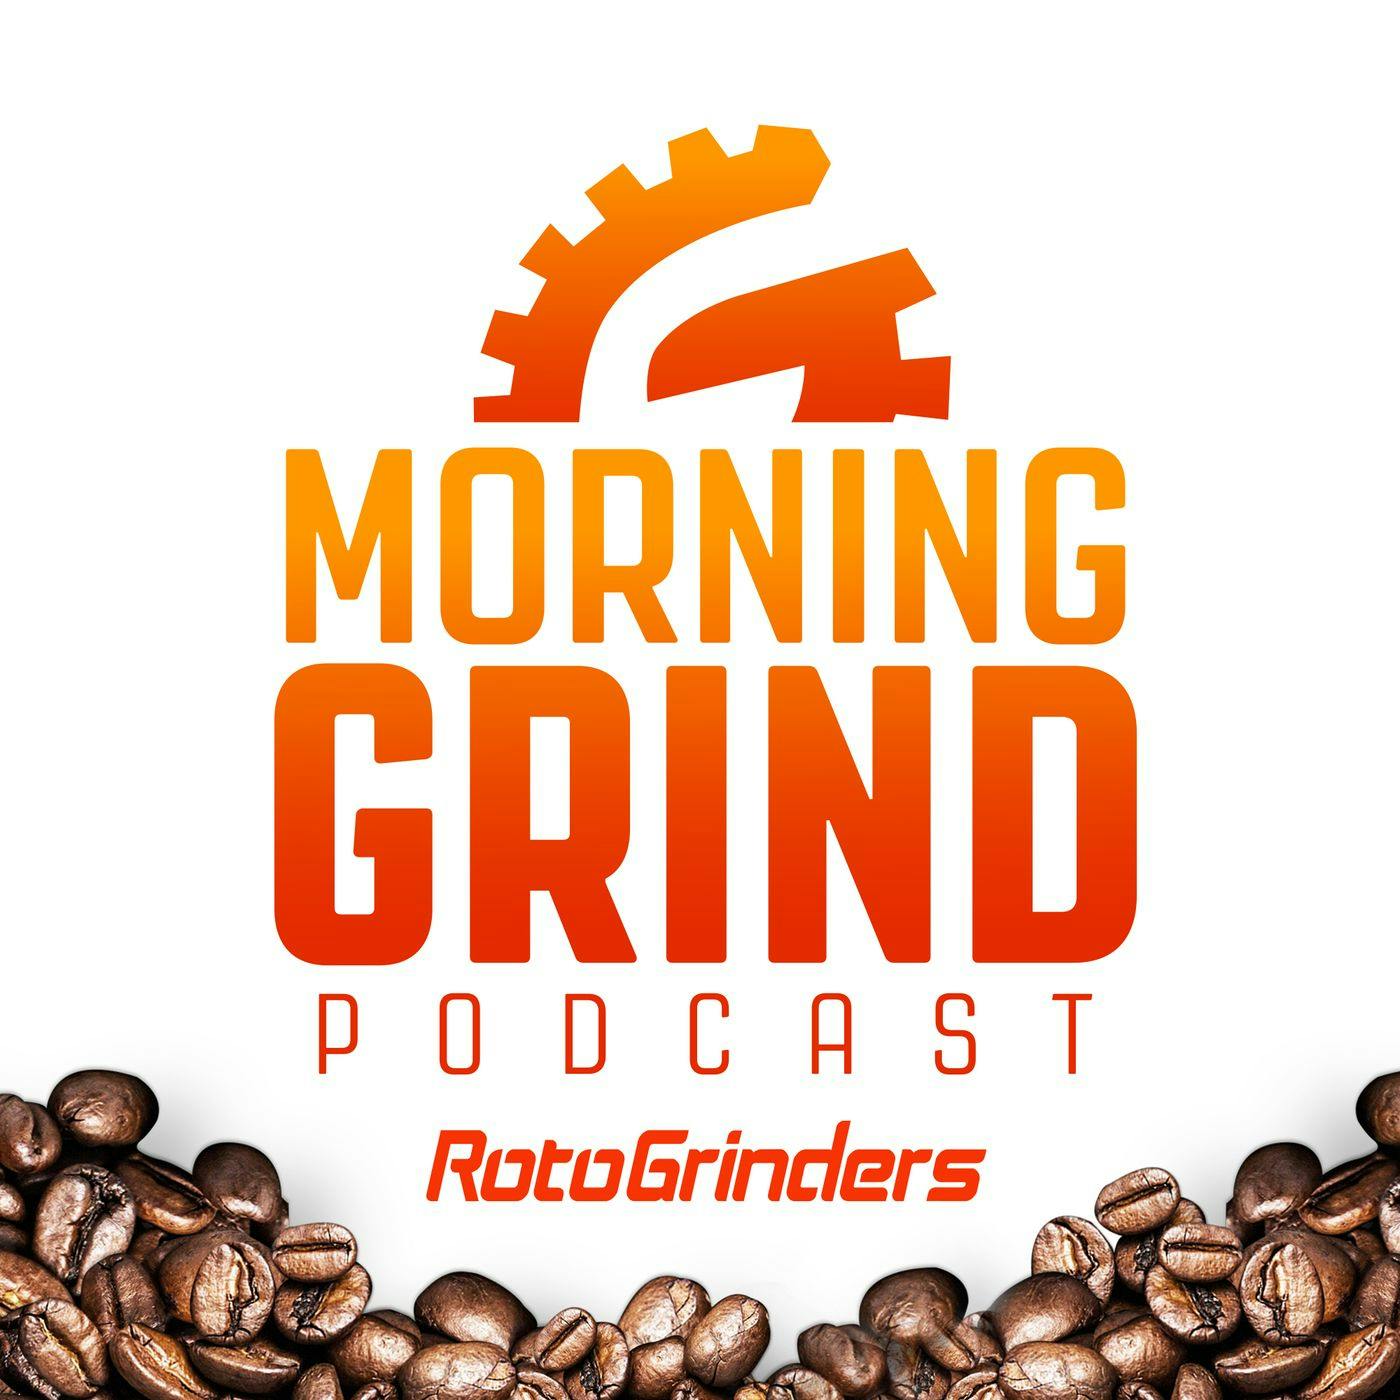 MLB Morning Grind: 6/7/2021 - Taking A Stand